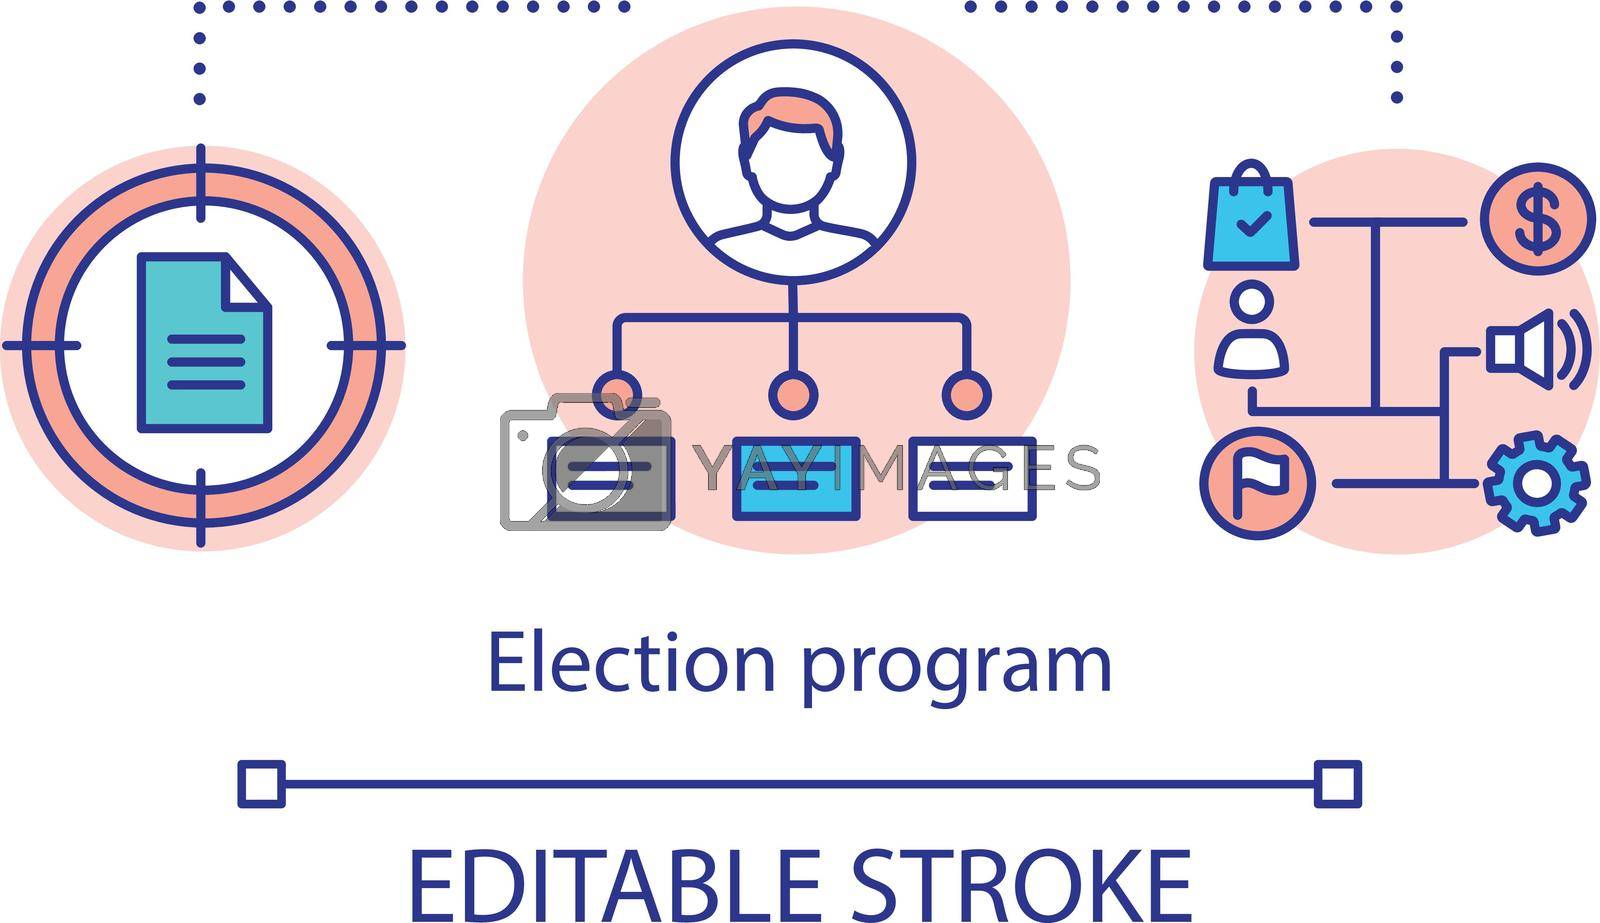 Royalty free image of Election program concept icon by bsd